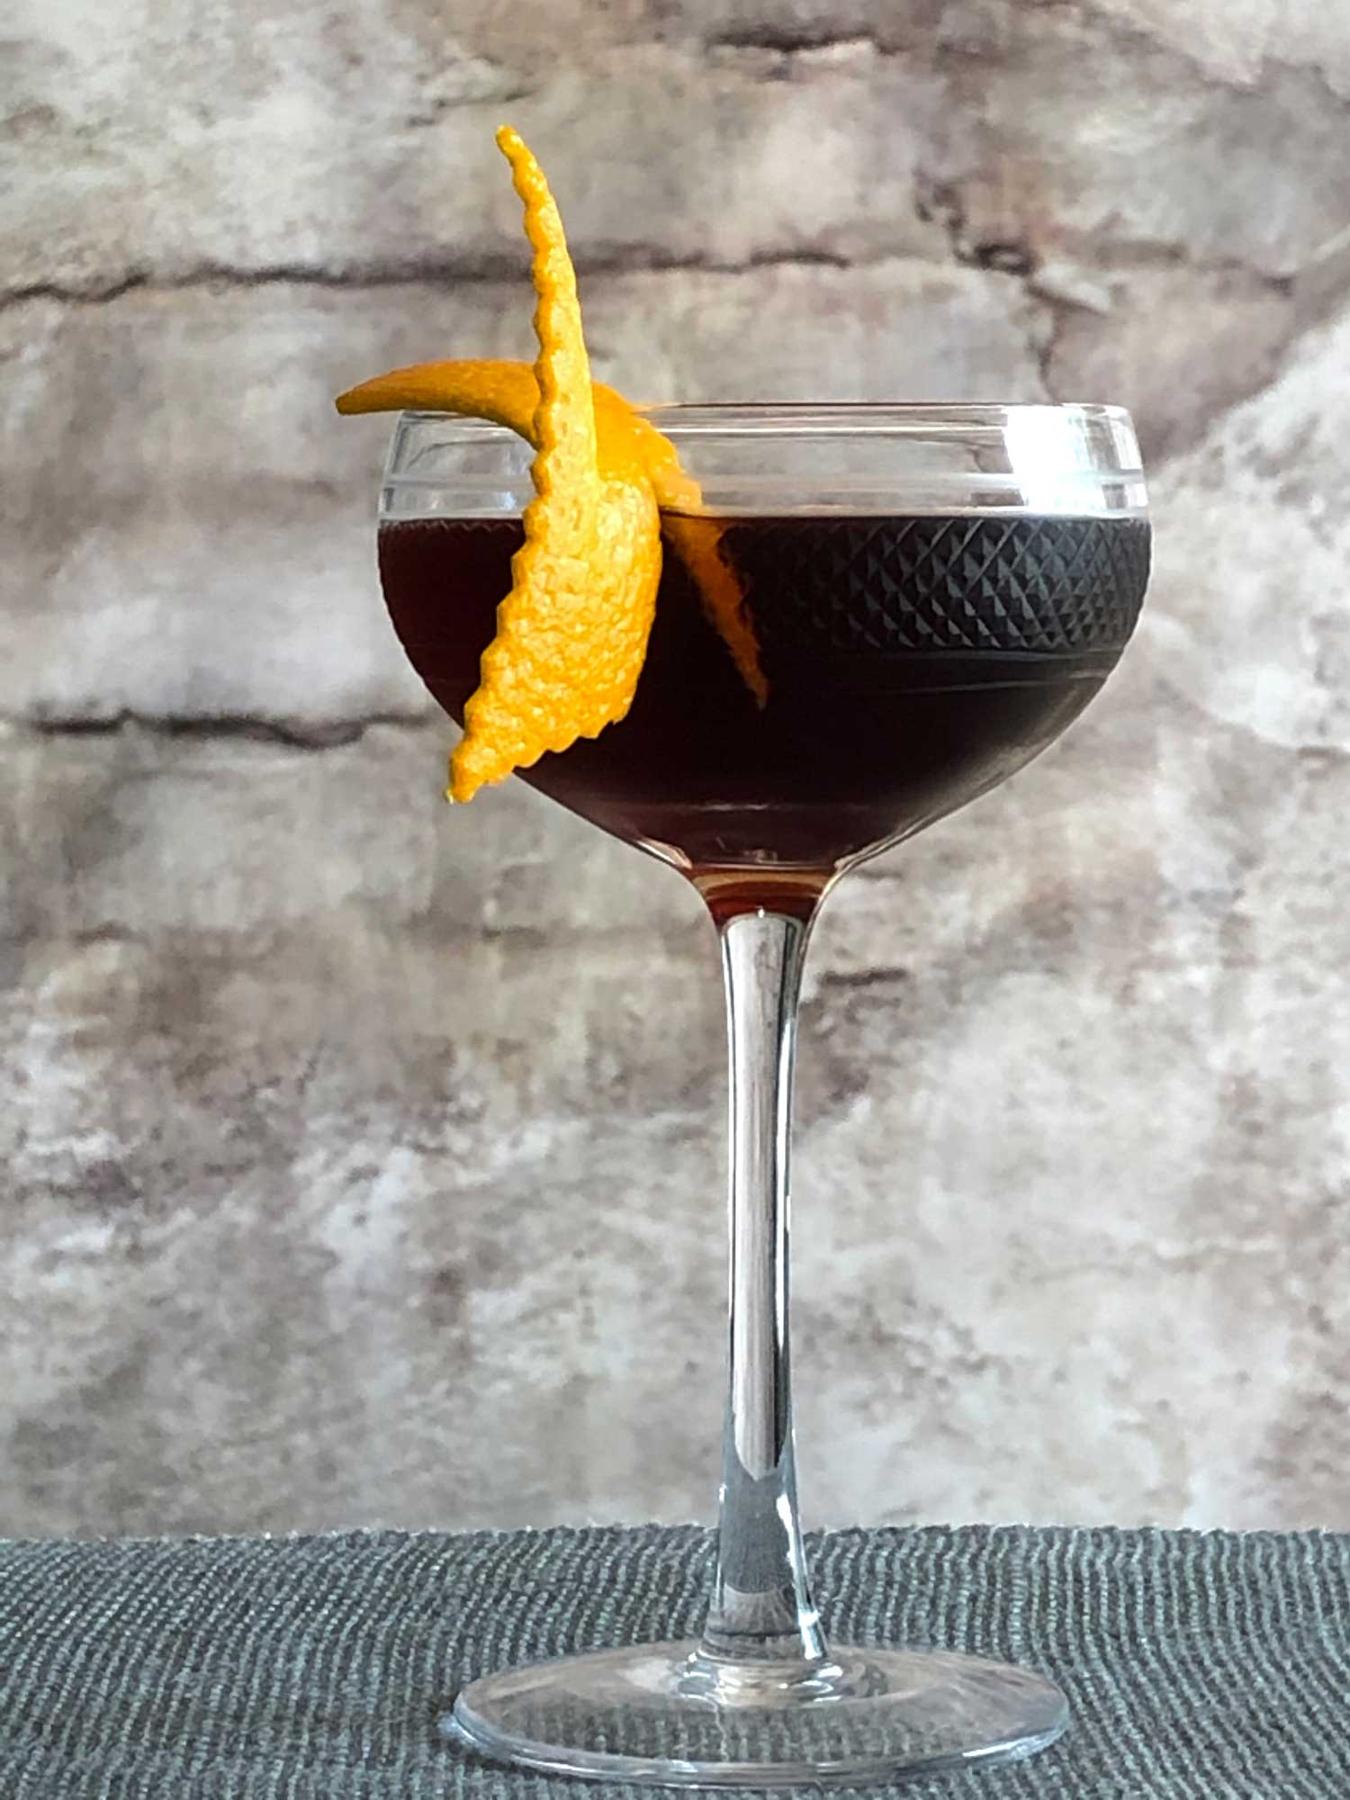 An example of the La Revuelta, the mixed drink (drink), by Lynn Falk, Acacia, Pittsburgh, featuring dark rum, Cocchi Dopo Teatro Vermouth Amaro, Amaro Sfumato Rabarbaro, Bittermens Xocolatl Mole Bitters, sprig of mint, and orange twist; photo by Lee Edwards